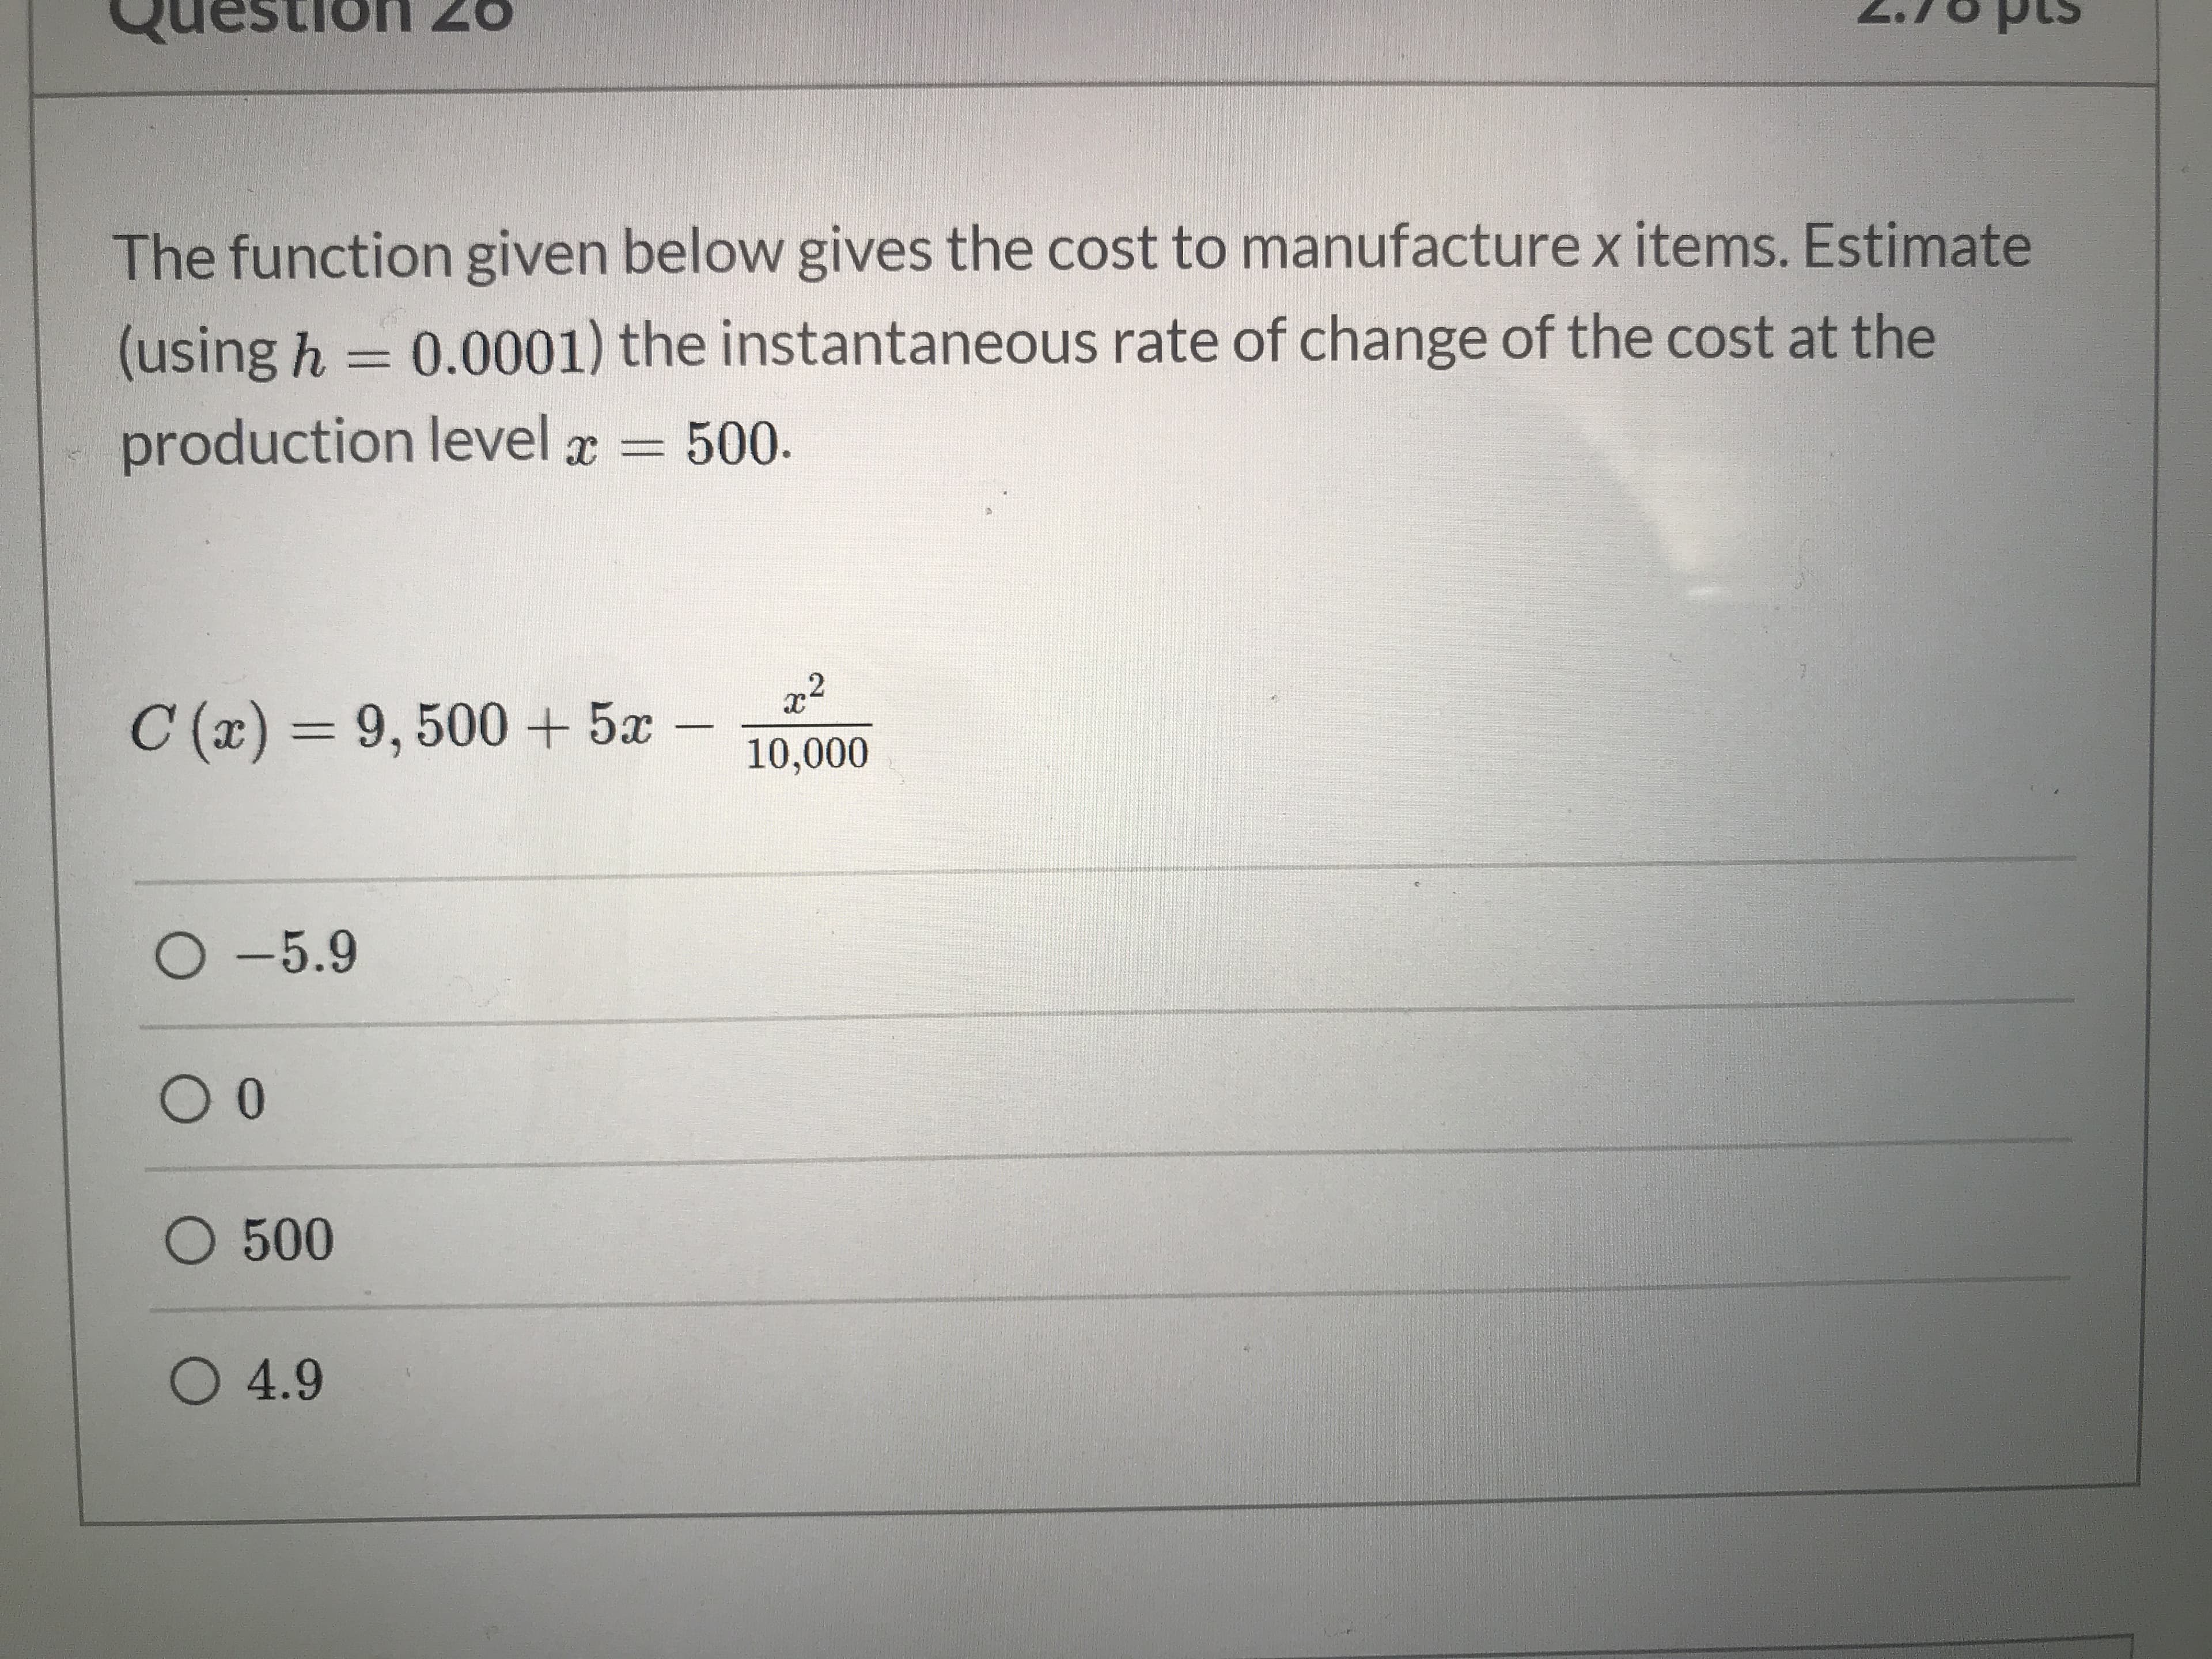 Testion 26
The function given below gives the cost to manufacture x items. Estimate
(using h = 0.0001) the instantaneous rate of change of the cost at the
%3D
production level a = 500.
C (x) = 9, 500+ 5x
%3D
10,000
O -5.9
O 500
O 4.9
